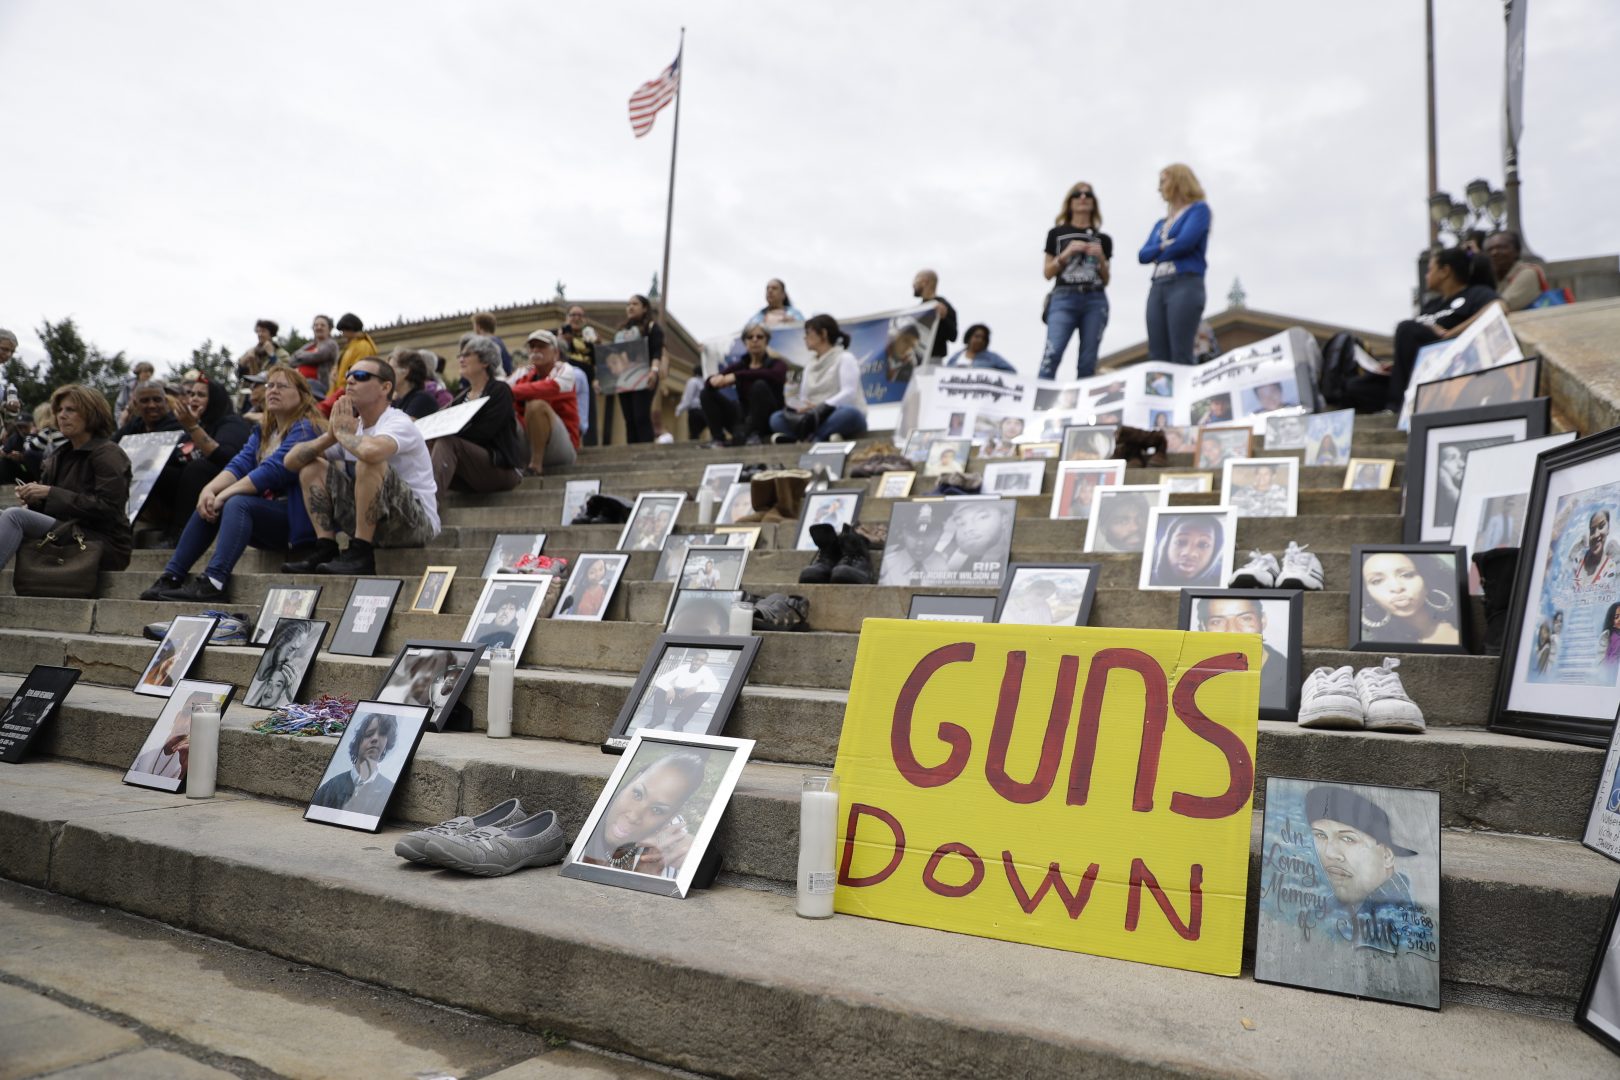 Demonstrators and students gather during a rally against gun violence on the steps of the Philadelphia Museum of Art, Monday, June 11, 2018, in Philadelphia.